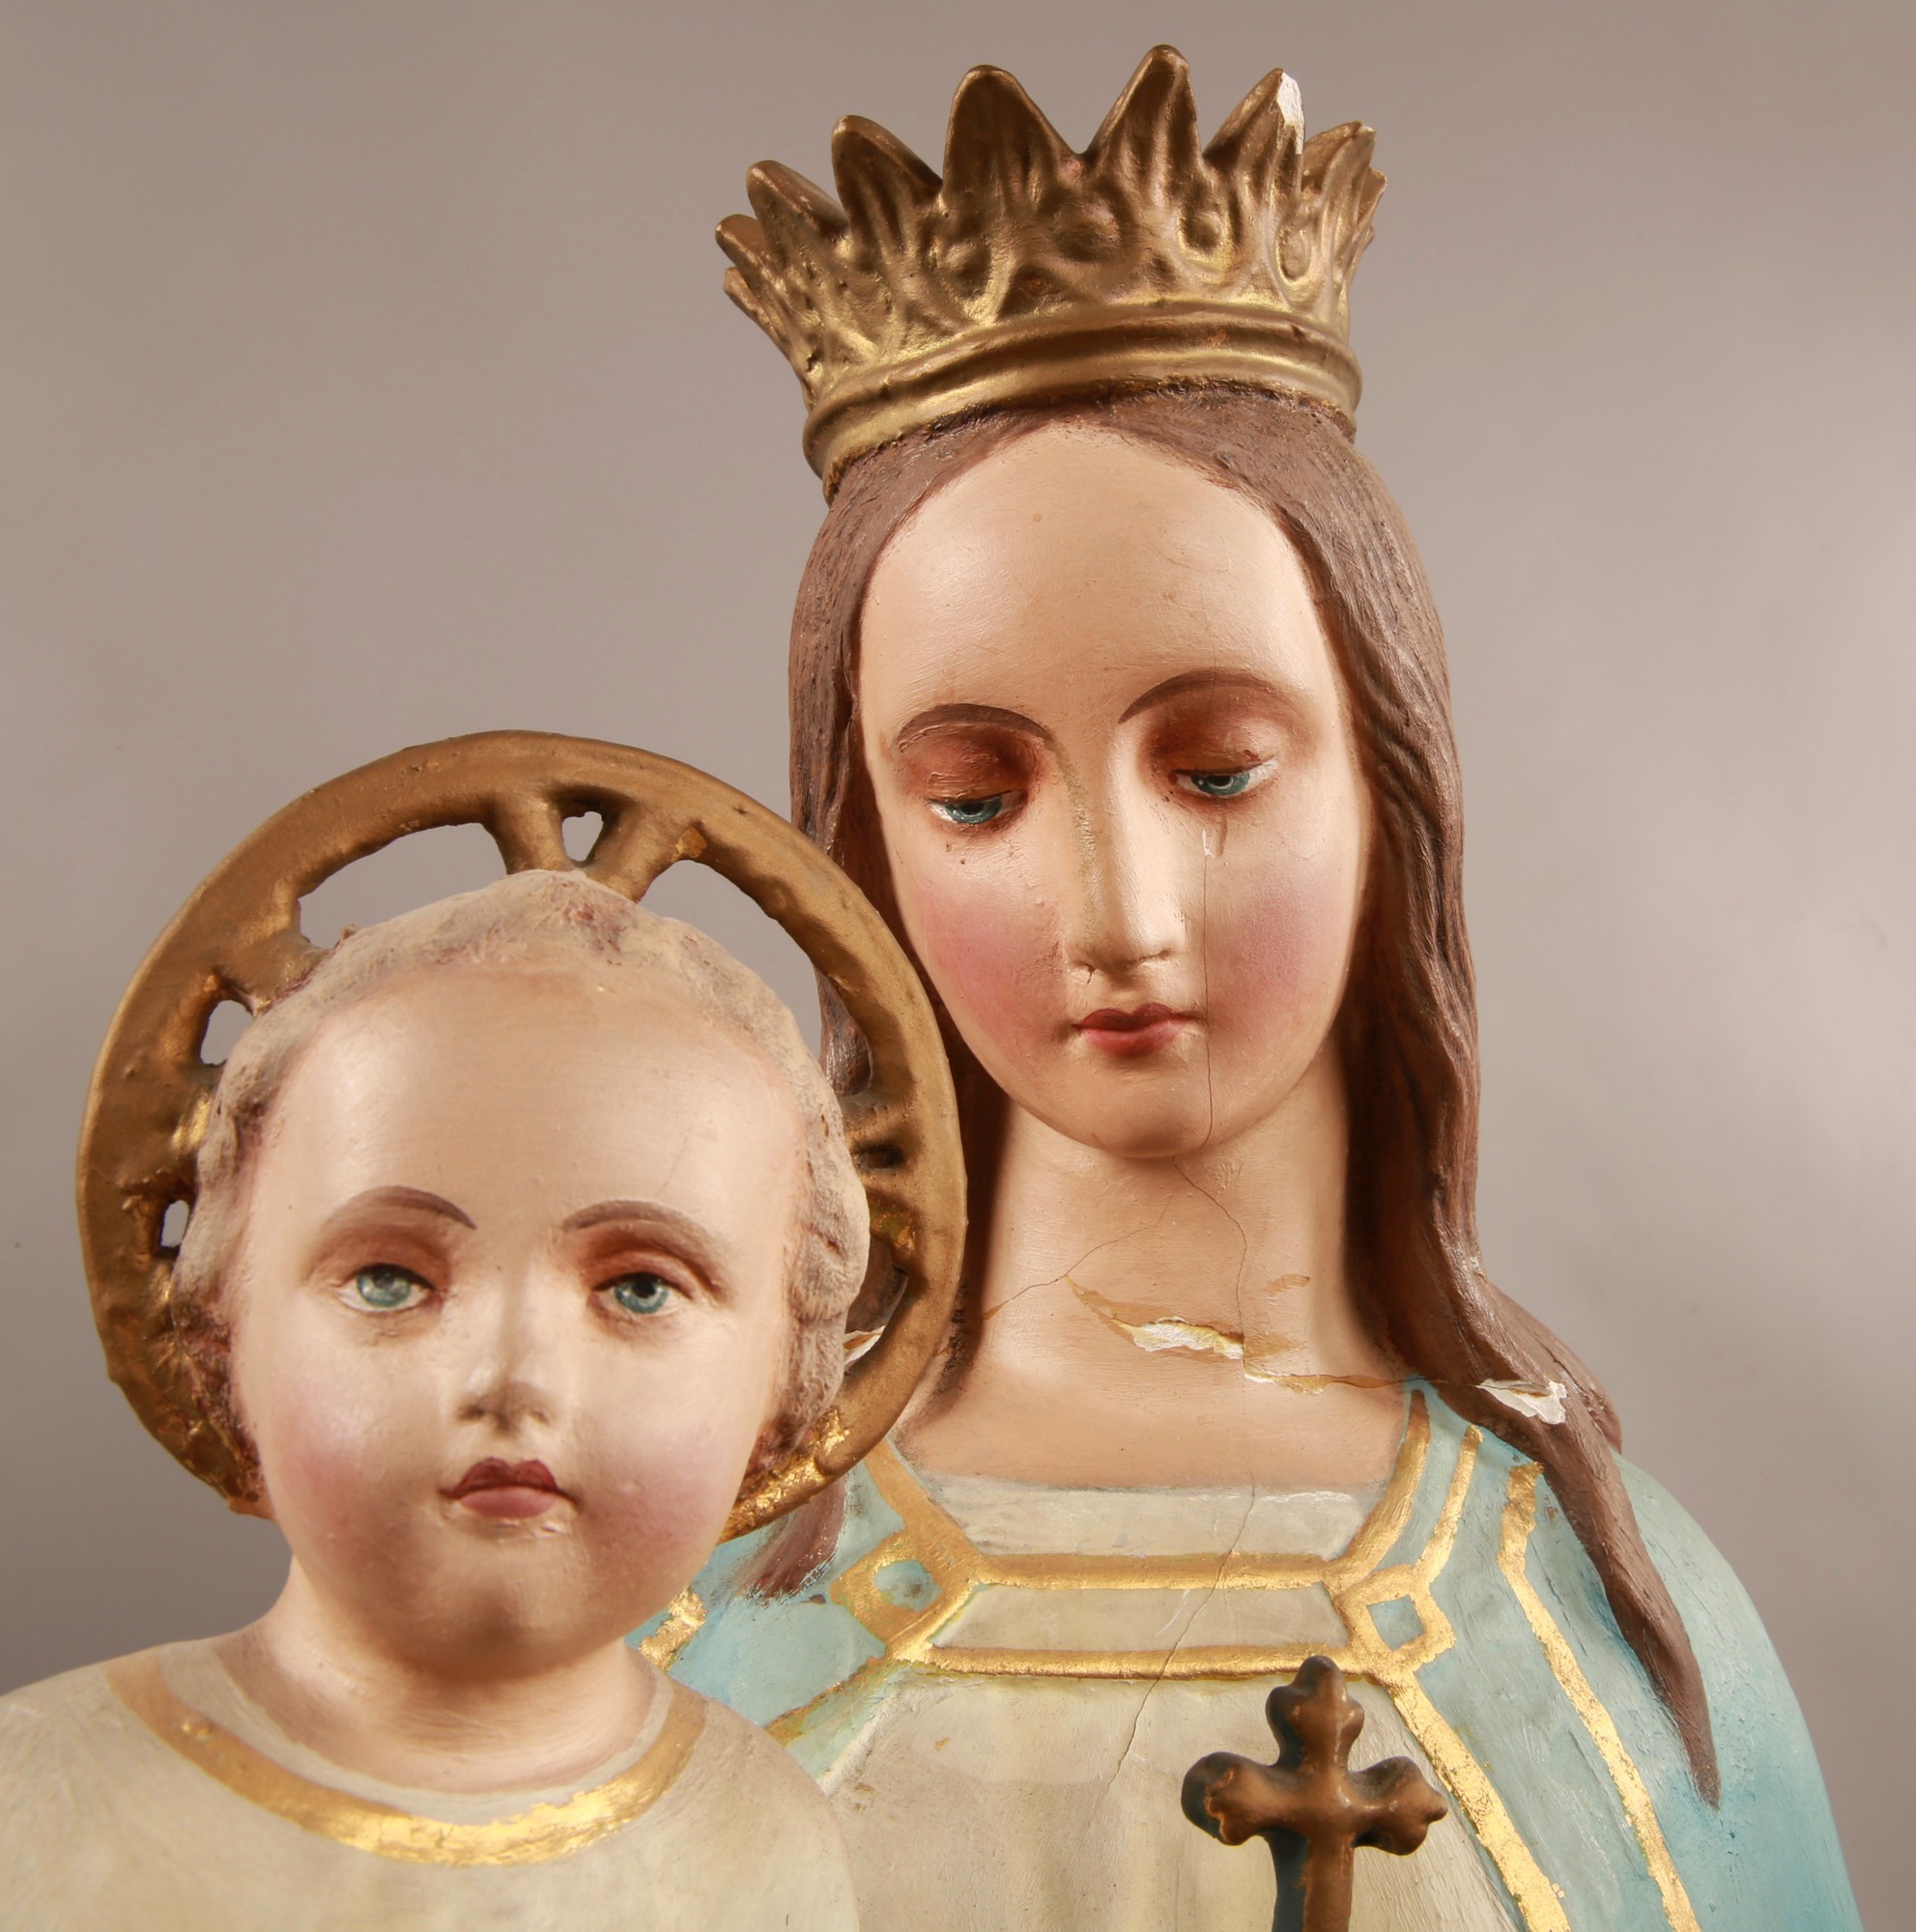 A Large Religious Statue of Mother Mary holding Baby Jesus Early 1900s 106cm Tall #92 - Image 2 of 7